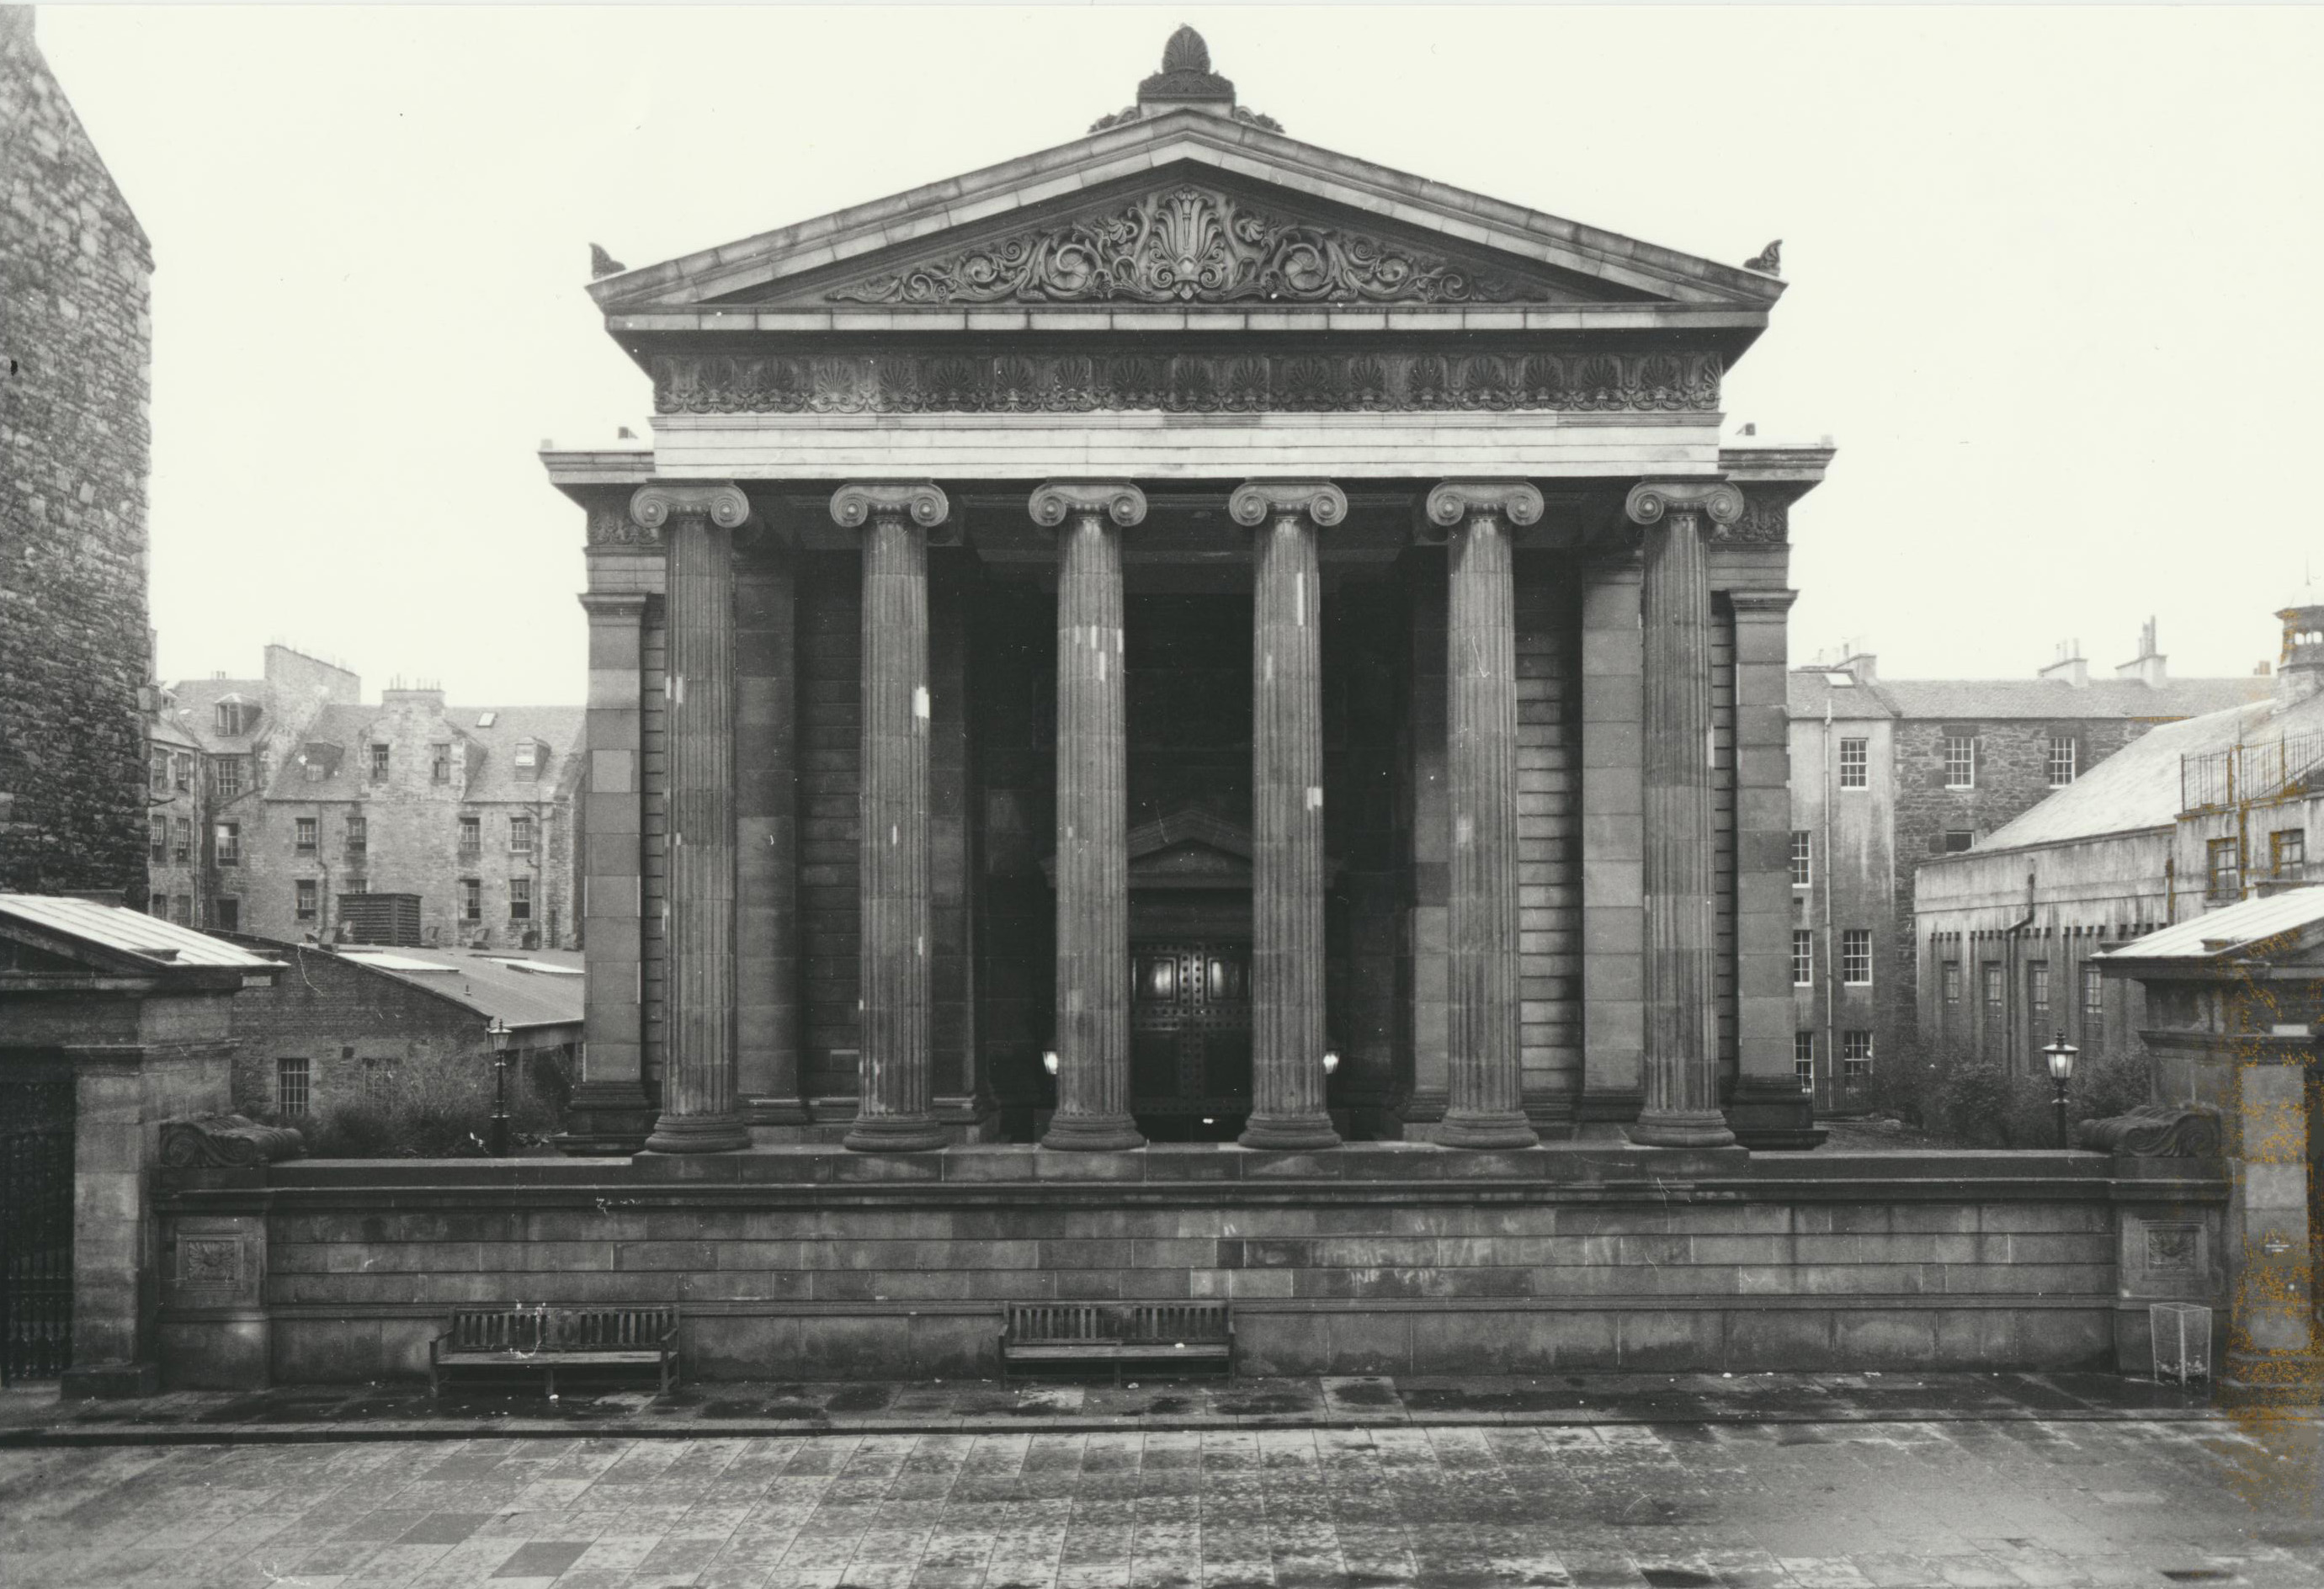 The front of a neoclassical building shaped like a Greek temple.